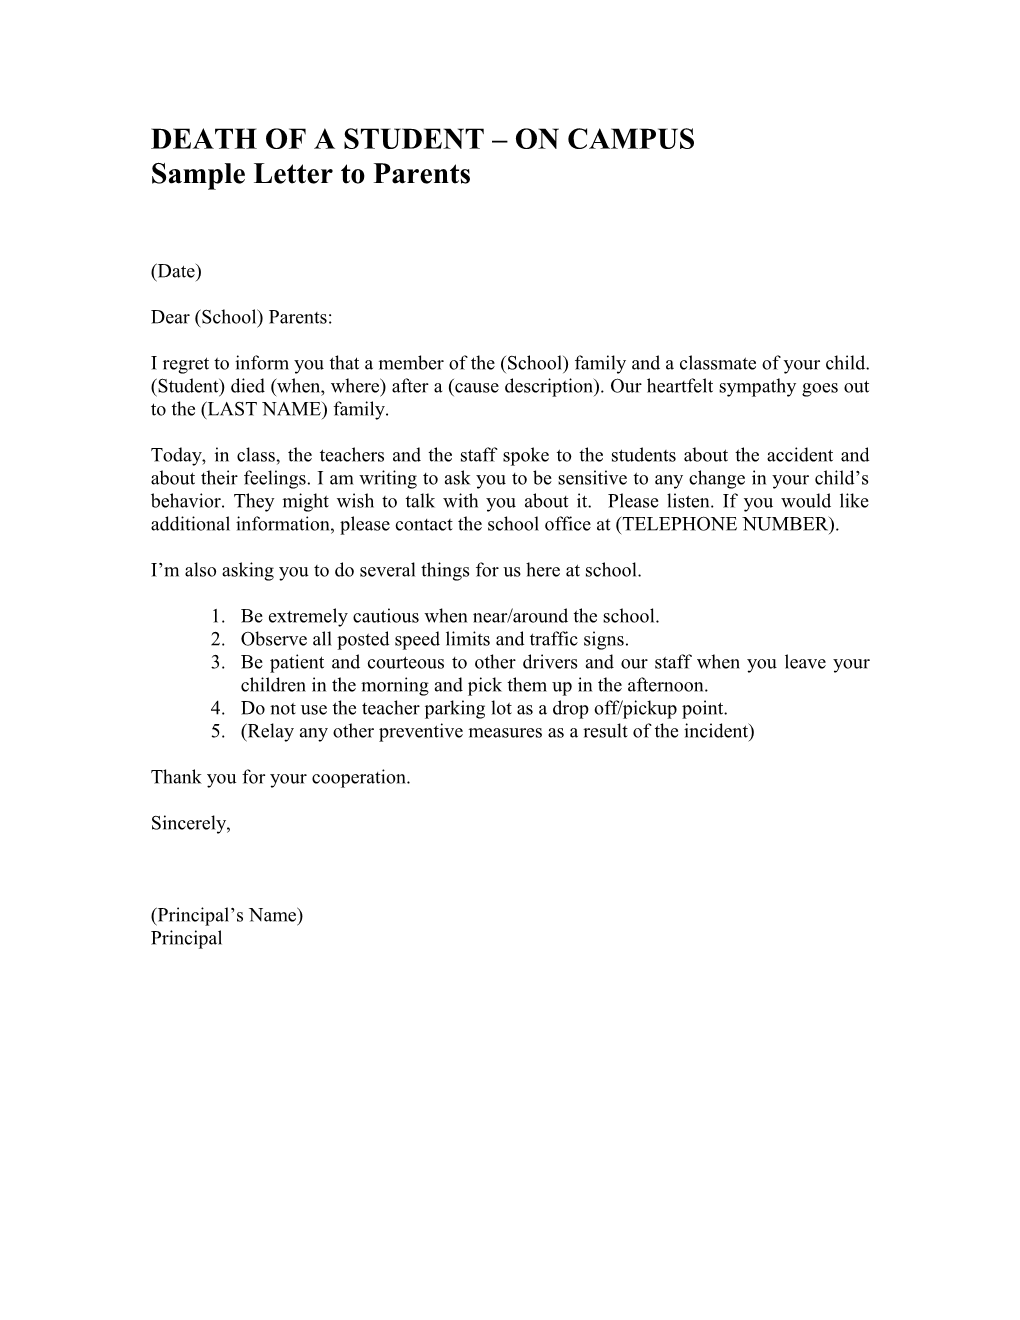 Sample Letters to Parents